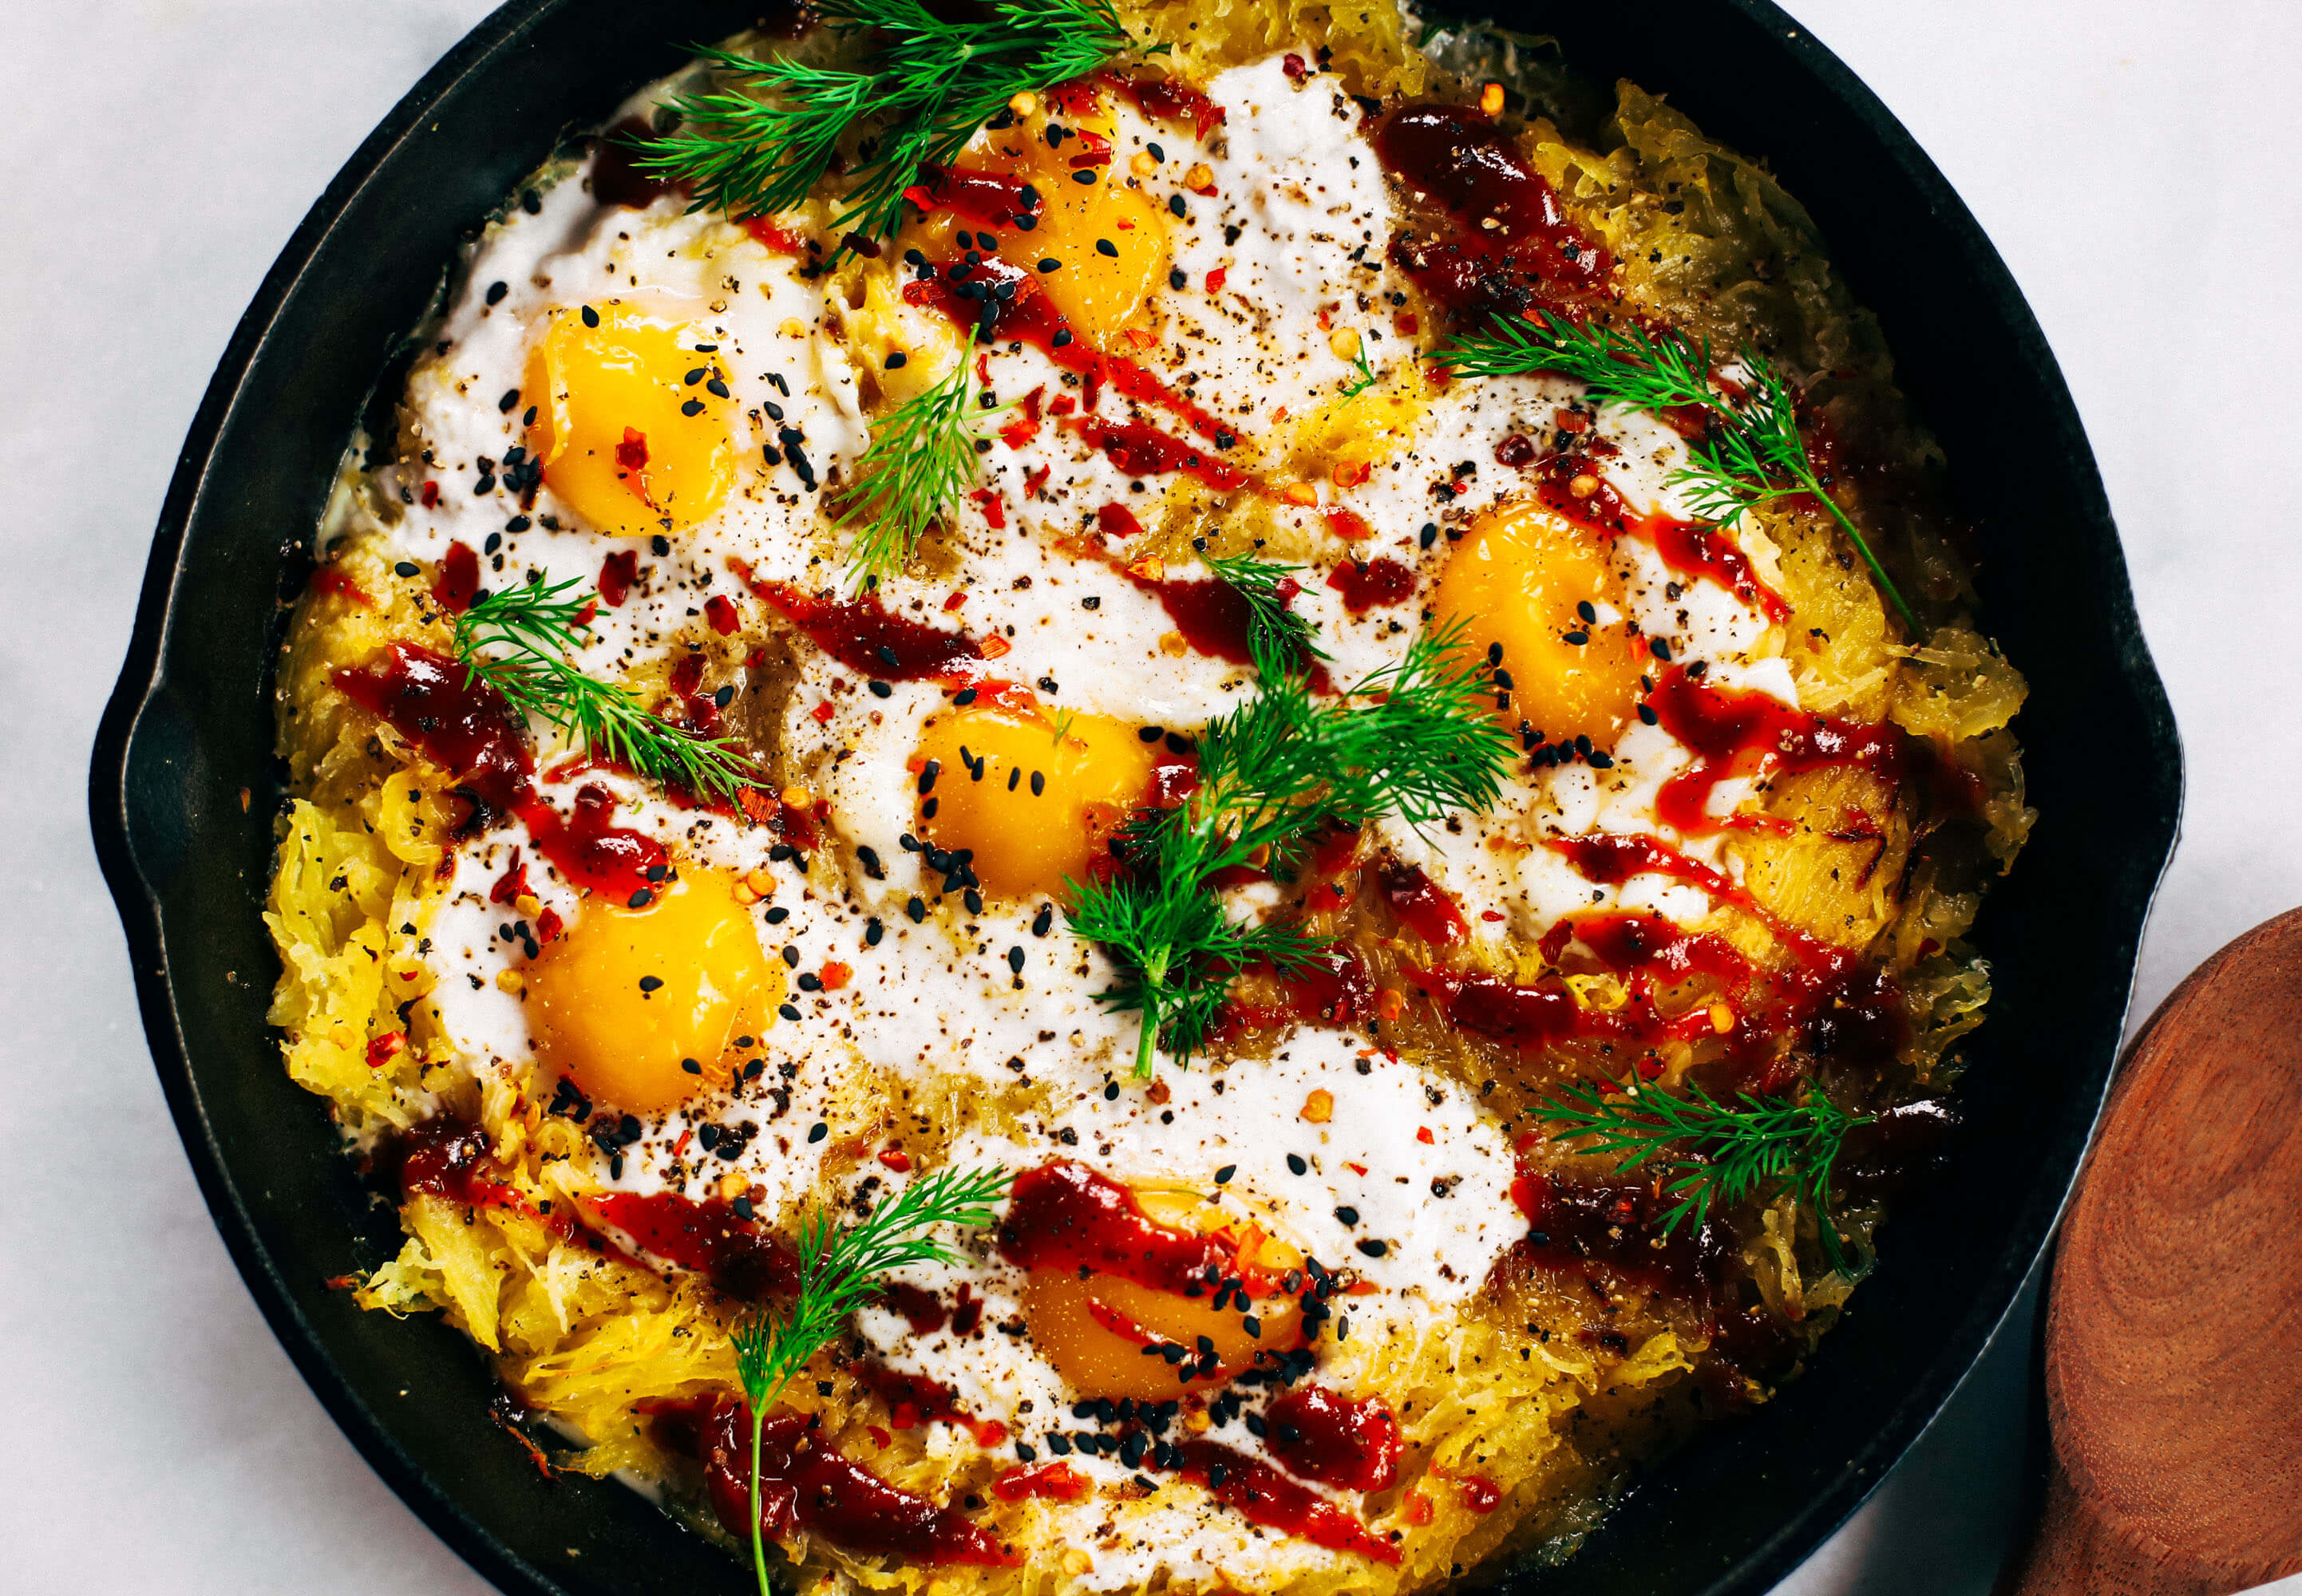 Whole30 spicy spaghetti squash egg skillet for breakfast. This easy filling breakfast skillet recipe is paleo, gluten free, and dairy free. Perfect for chilly winter mornings and whole30 meal prep! Best paleo and whole30 breakfast recipes for the family! #paleo #whole30